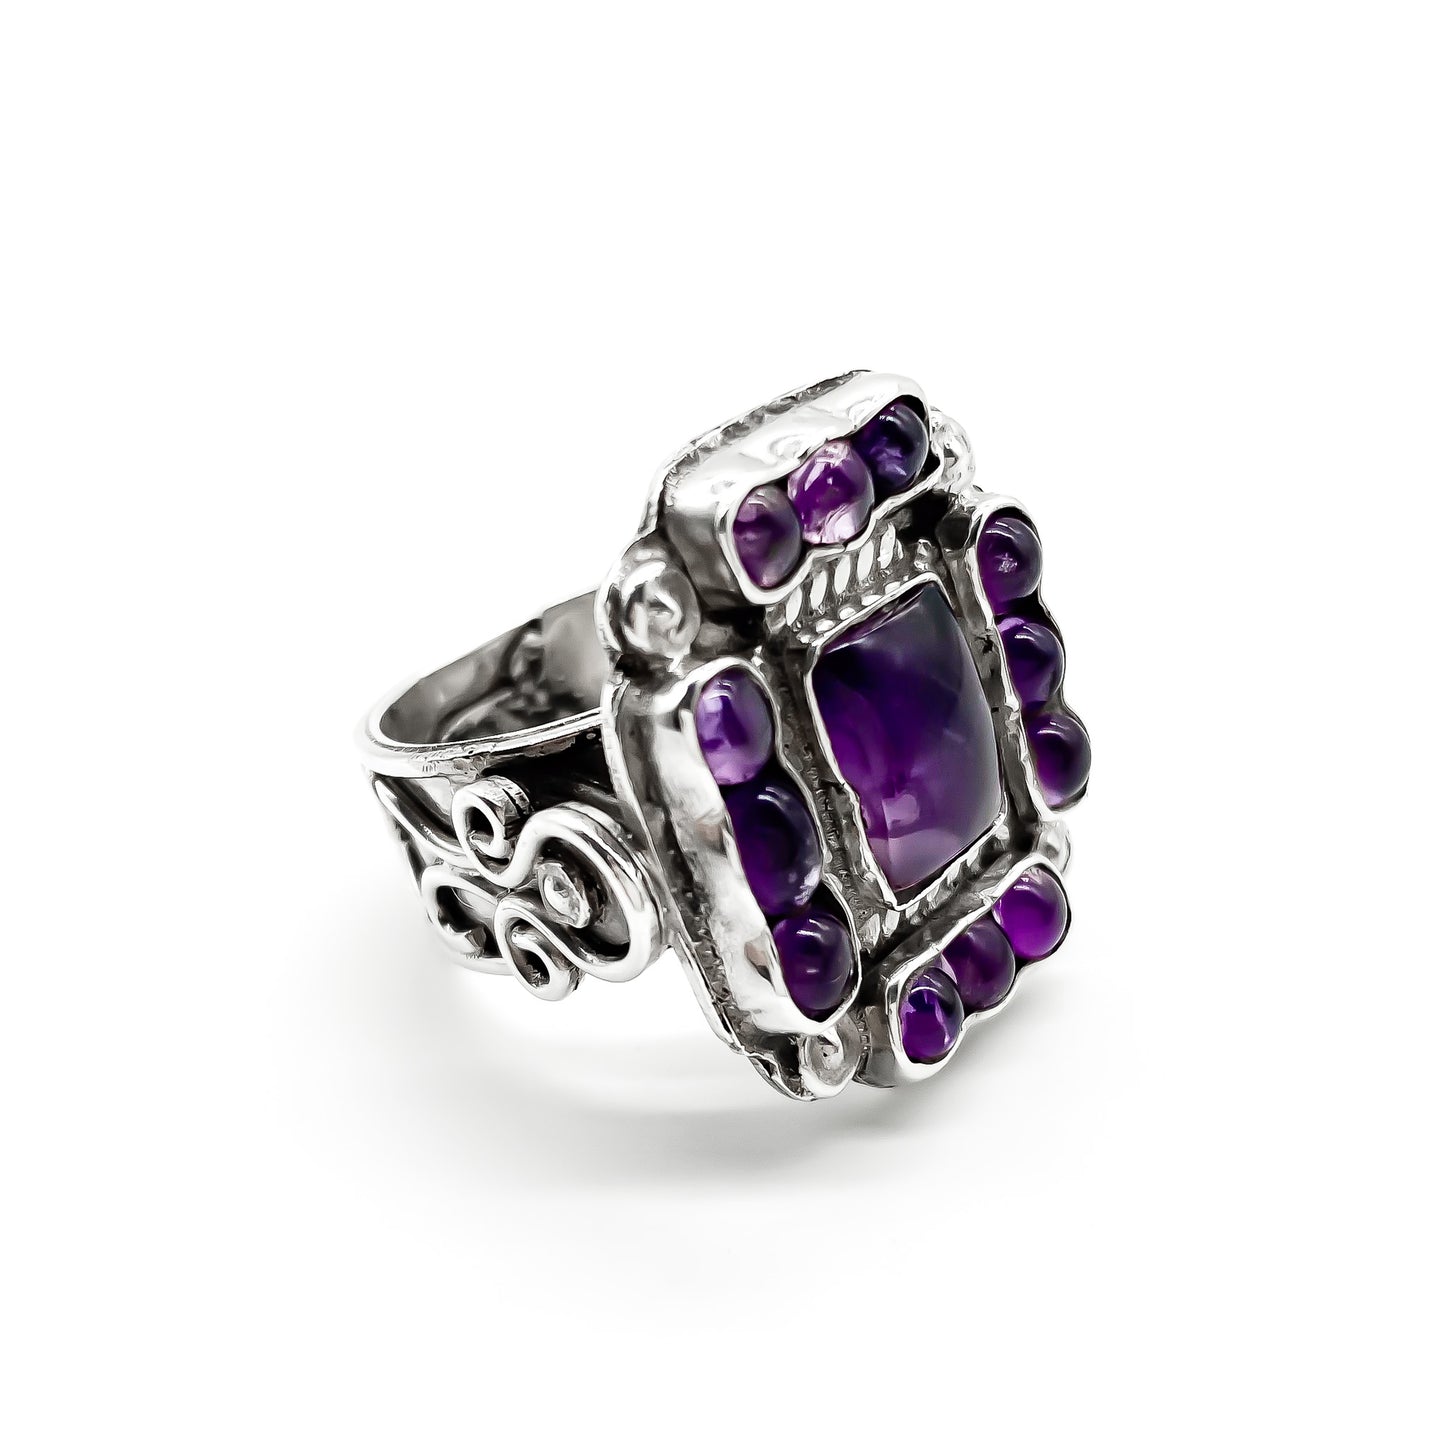 Charming vintage Mexican sterling silver ring set with deep purple cabochon amethysts. 